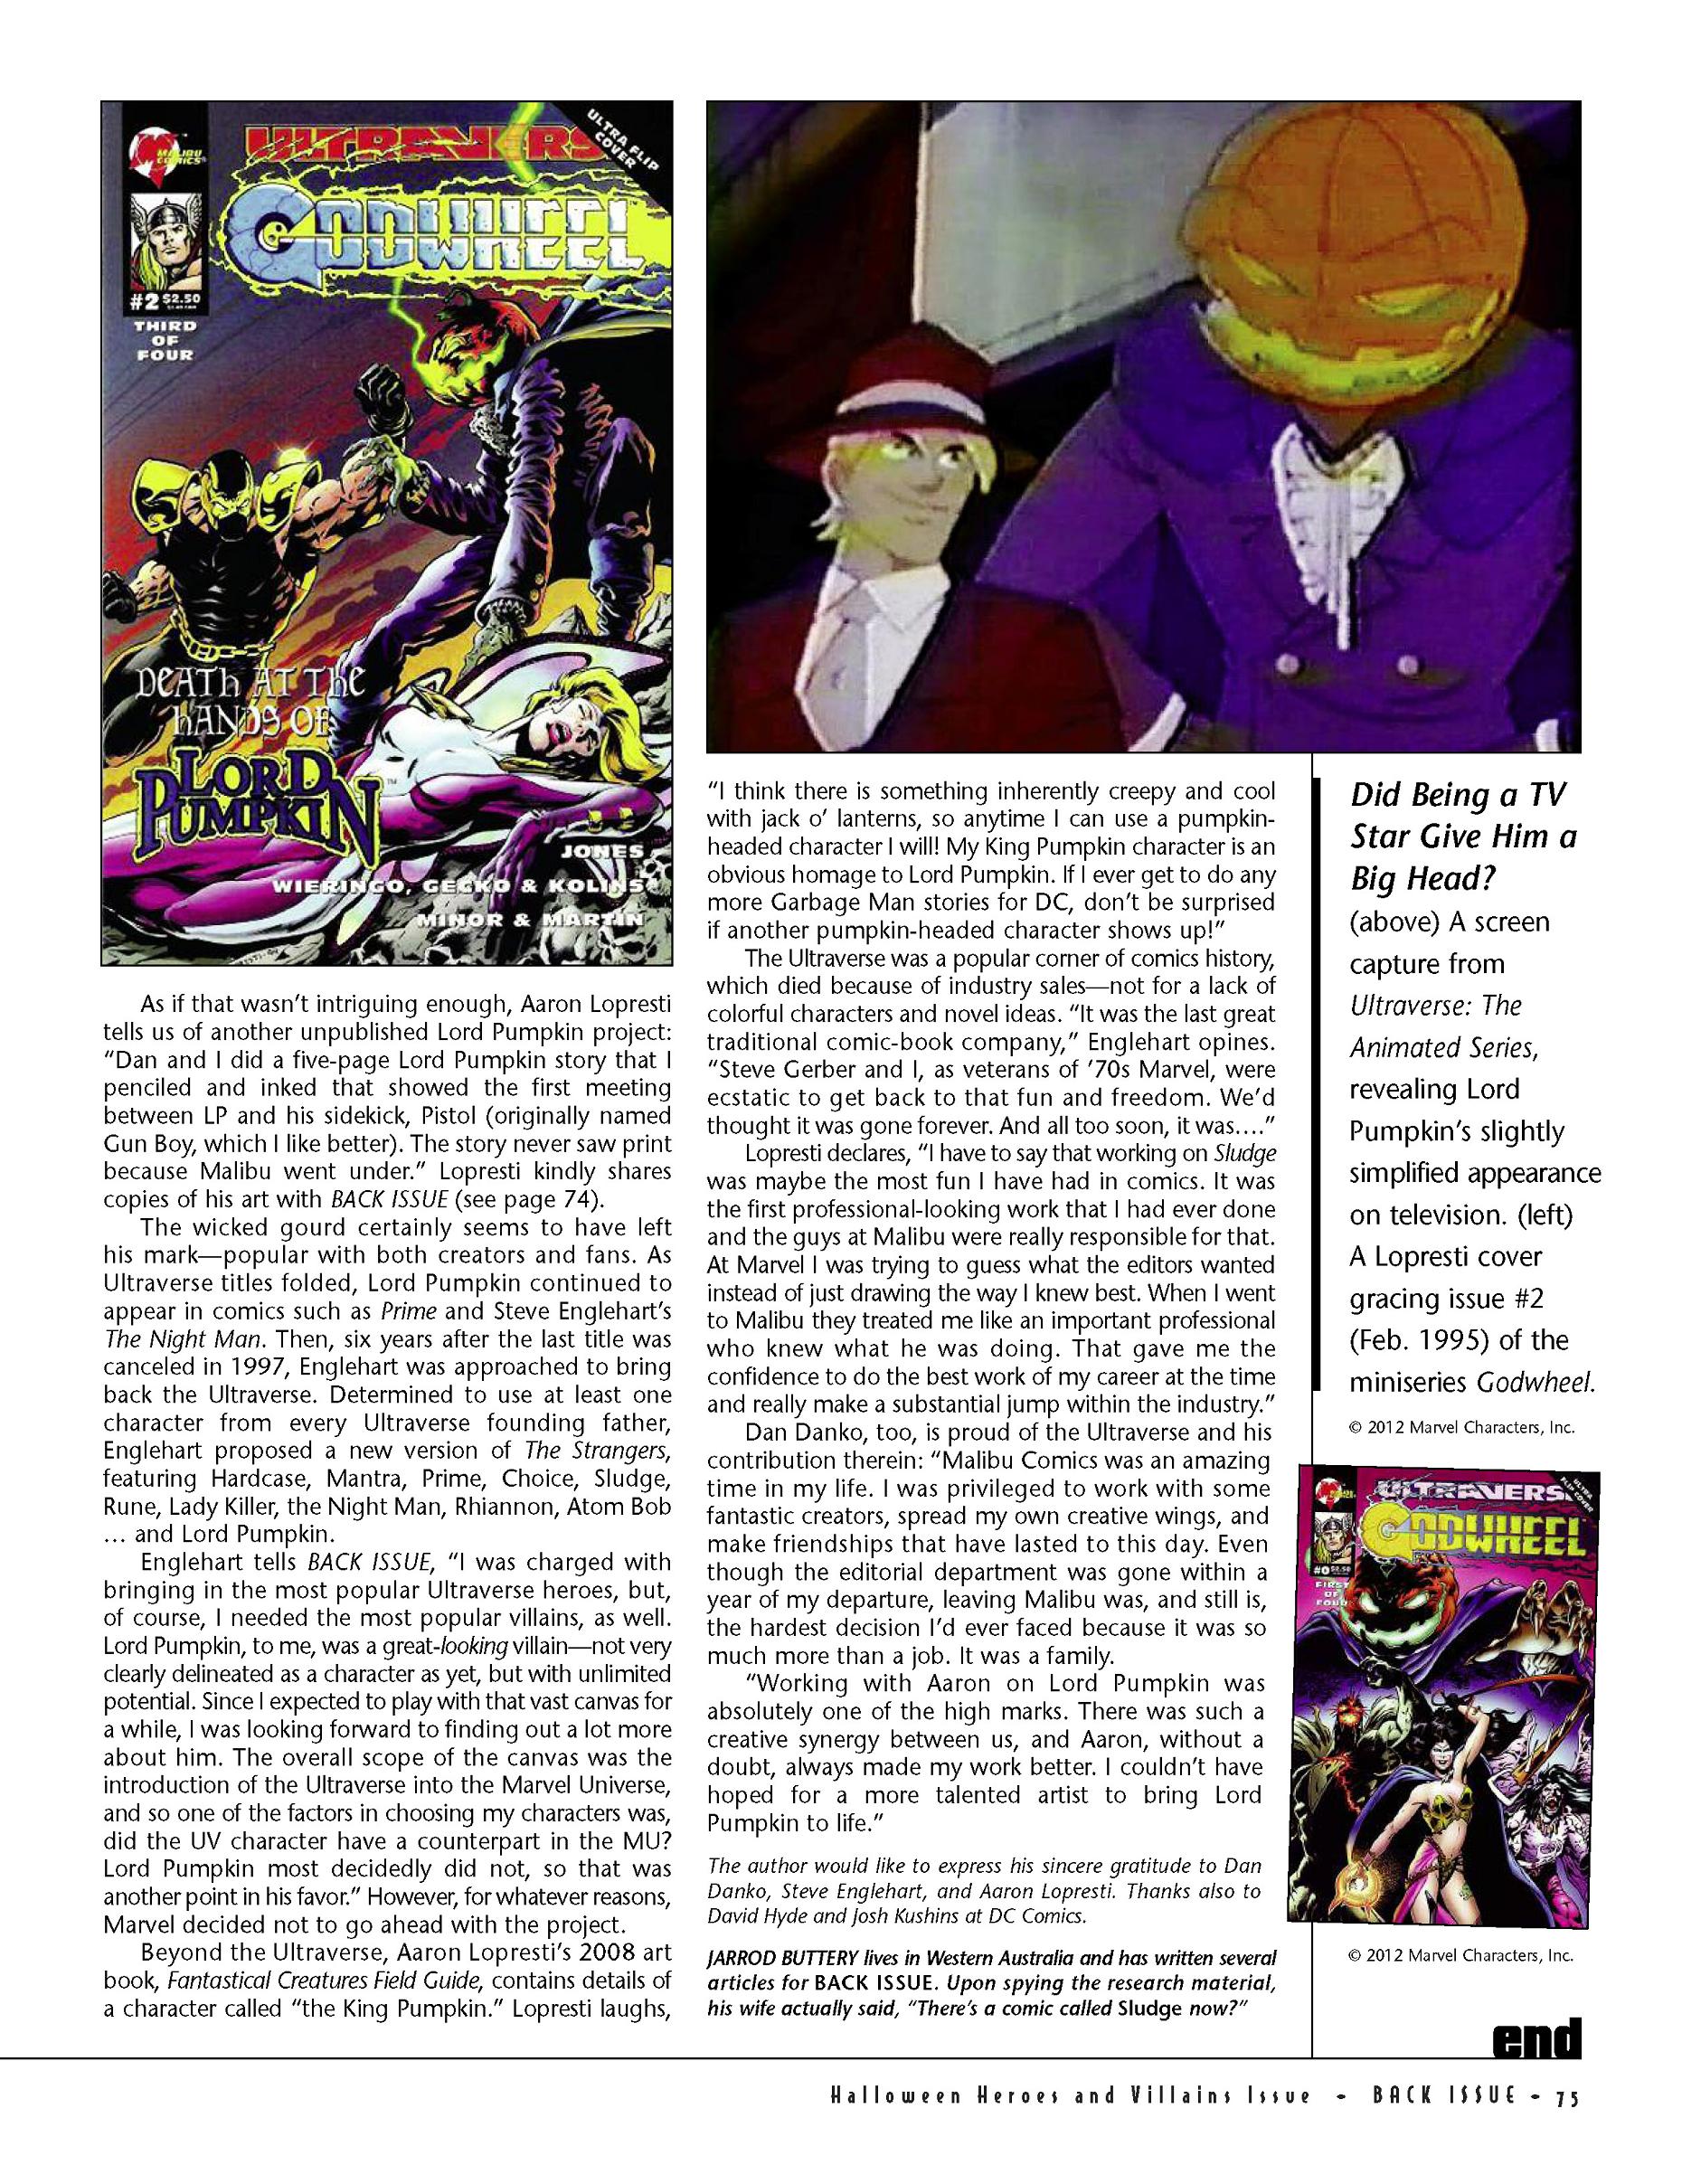 Read online Back Issue comic -  Issue #60 - 74